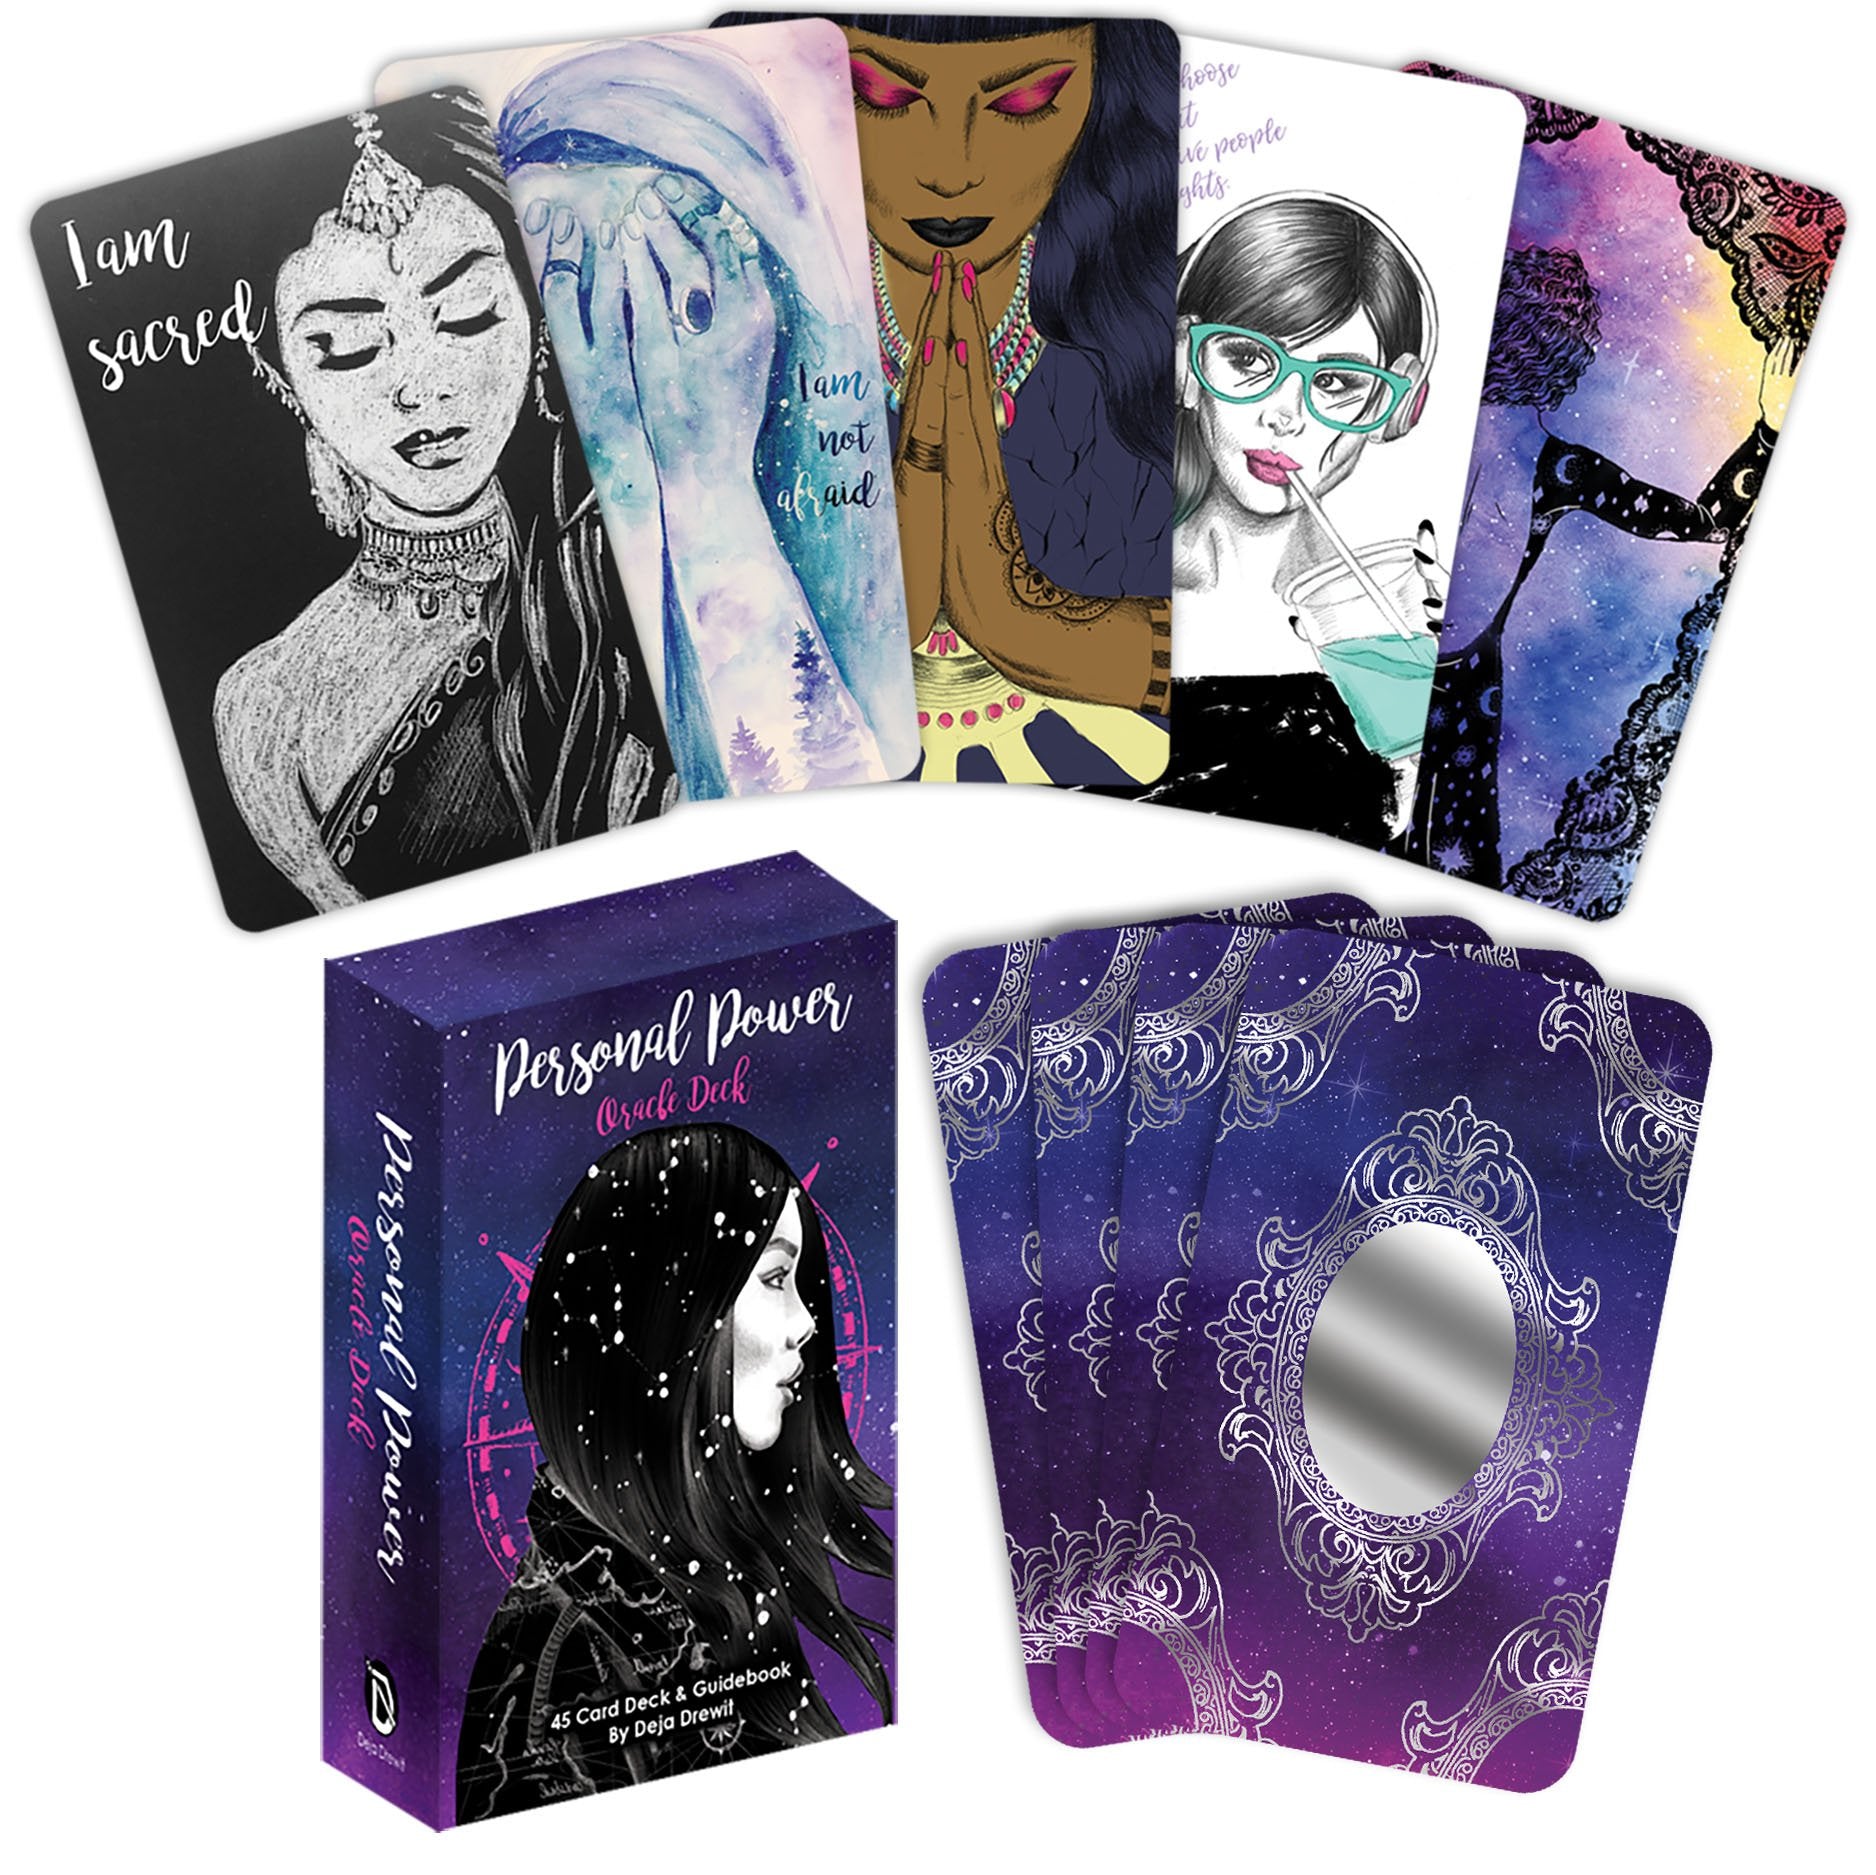 Personal Power Affirmation Cards for Confidence & Empowerment